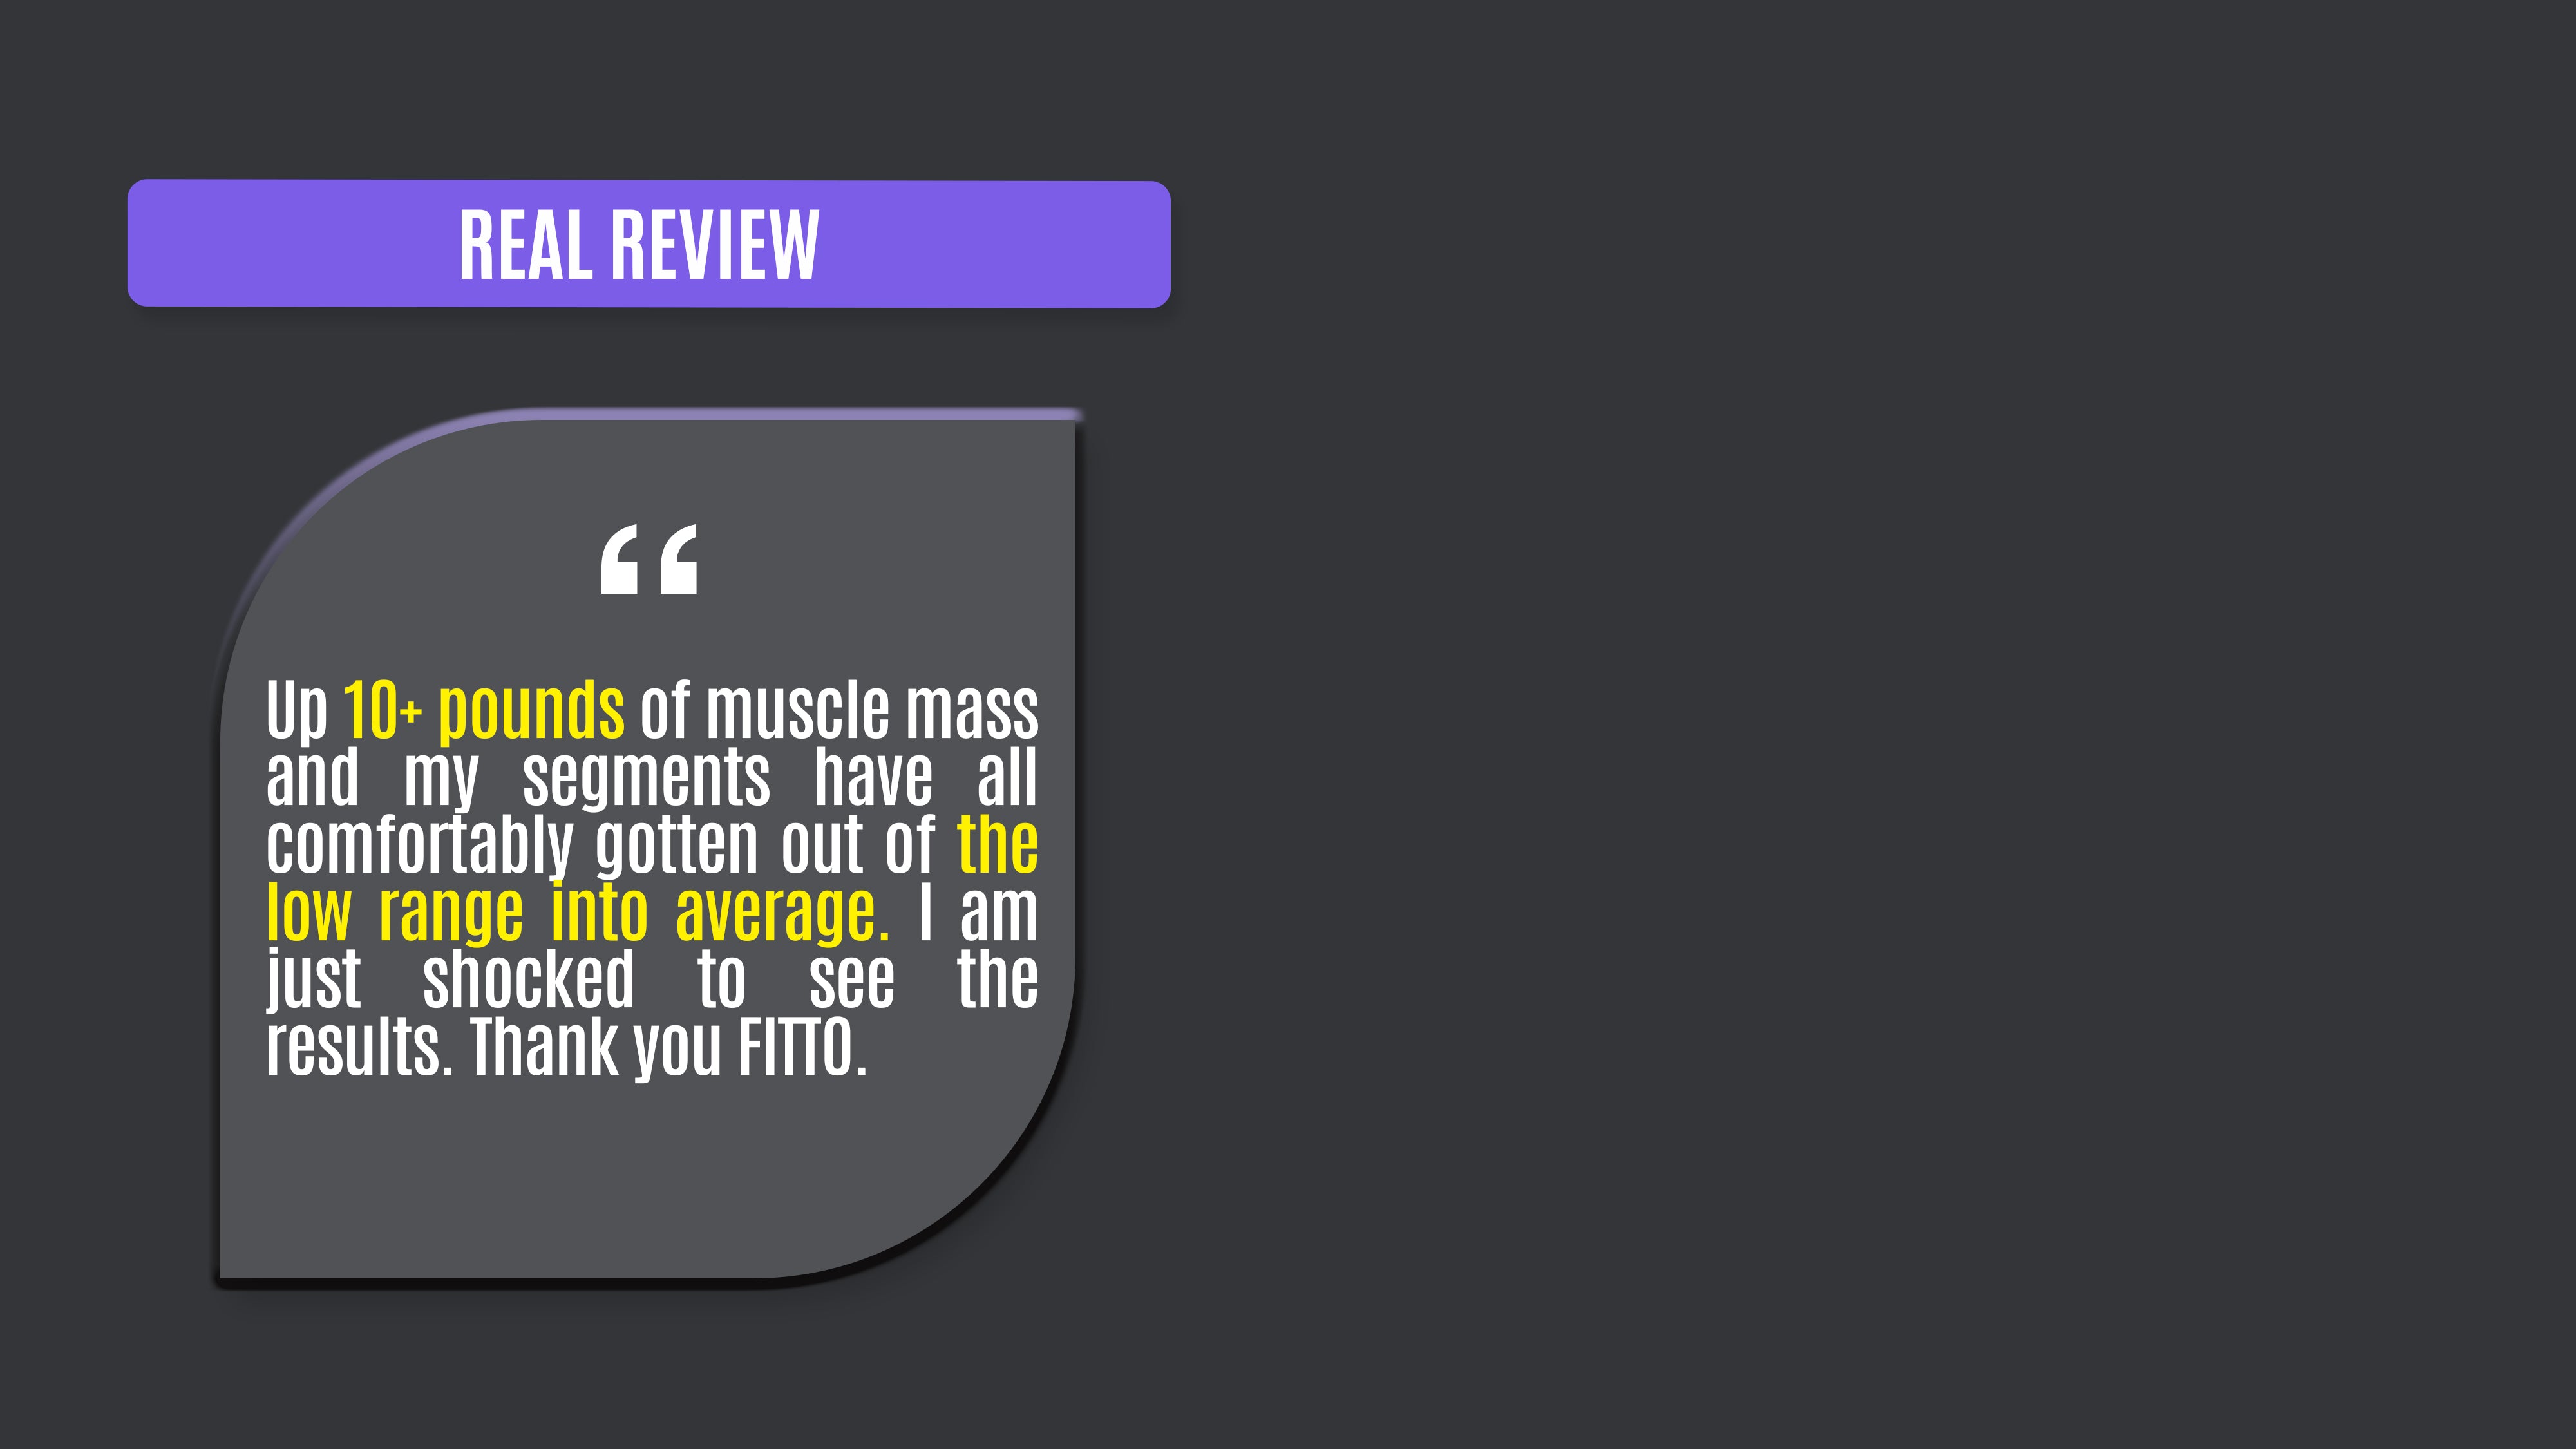 Change in Muscle Mass